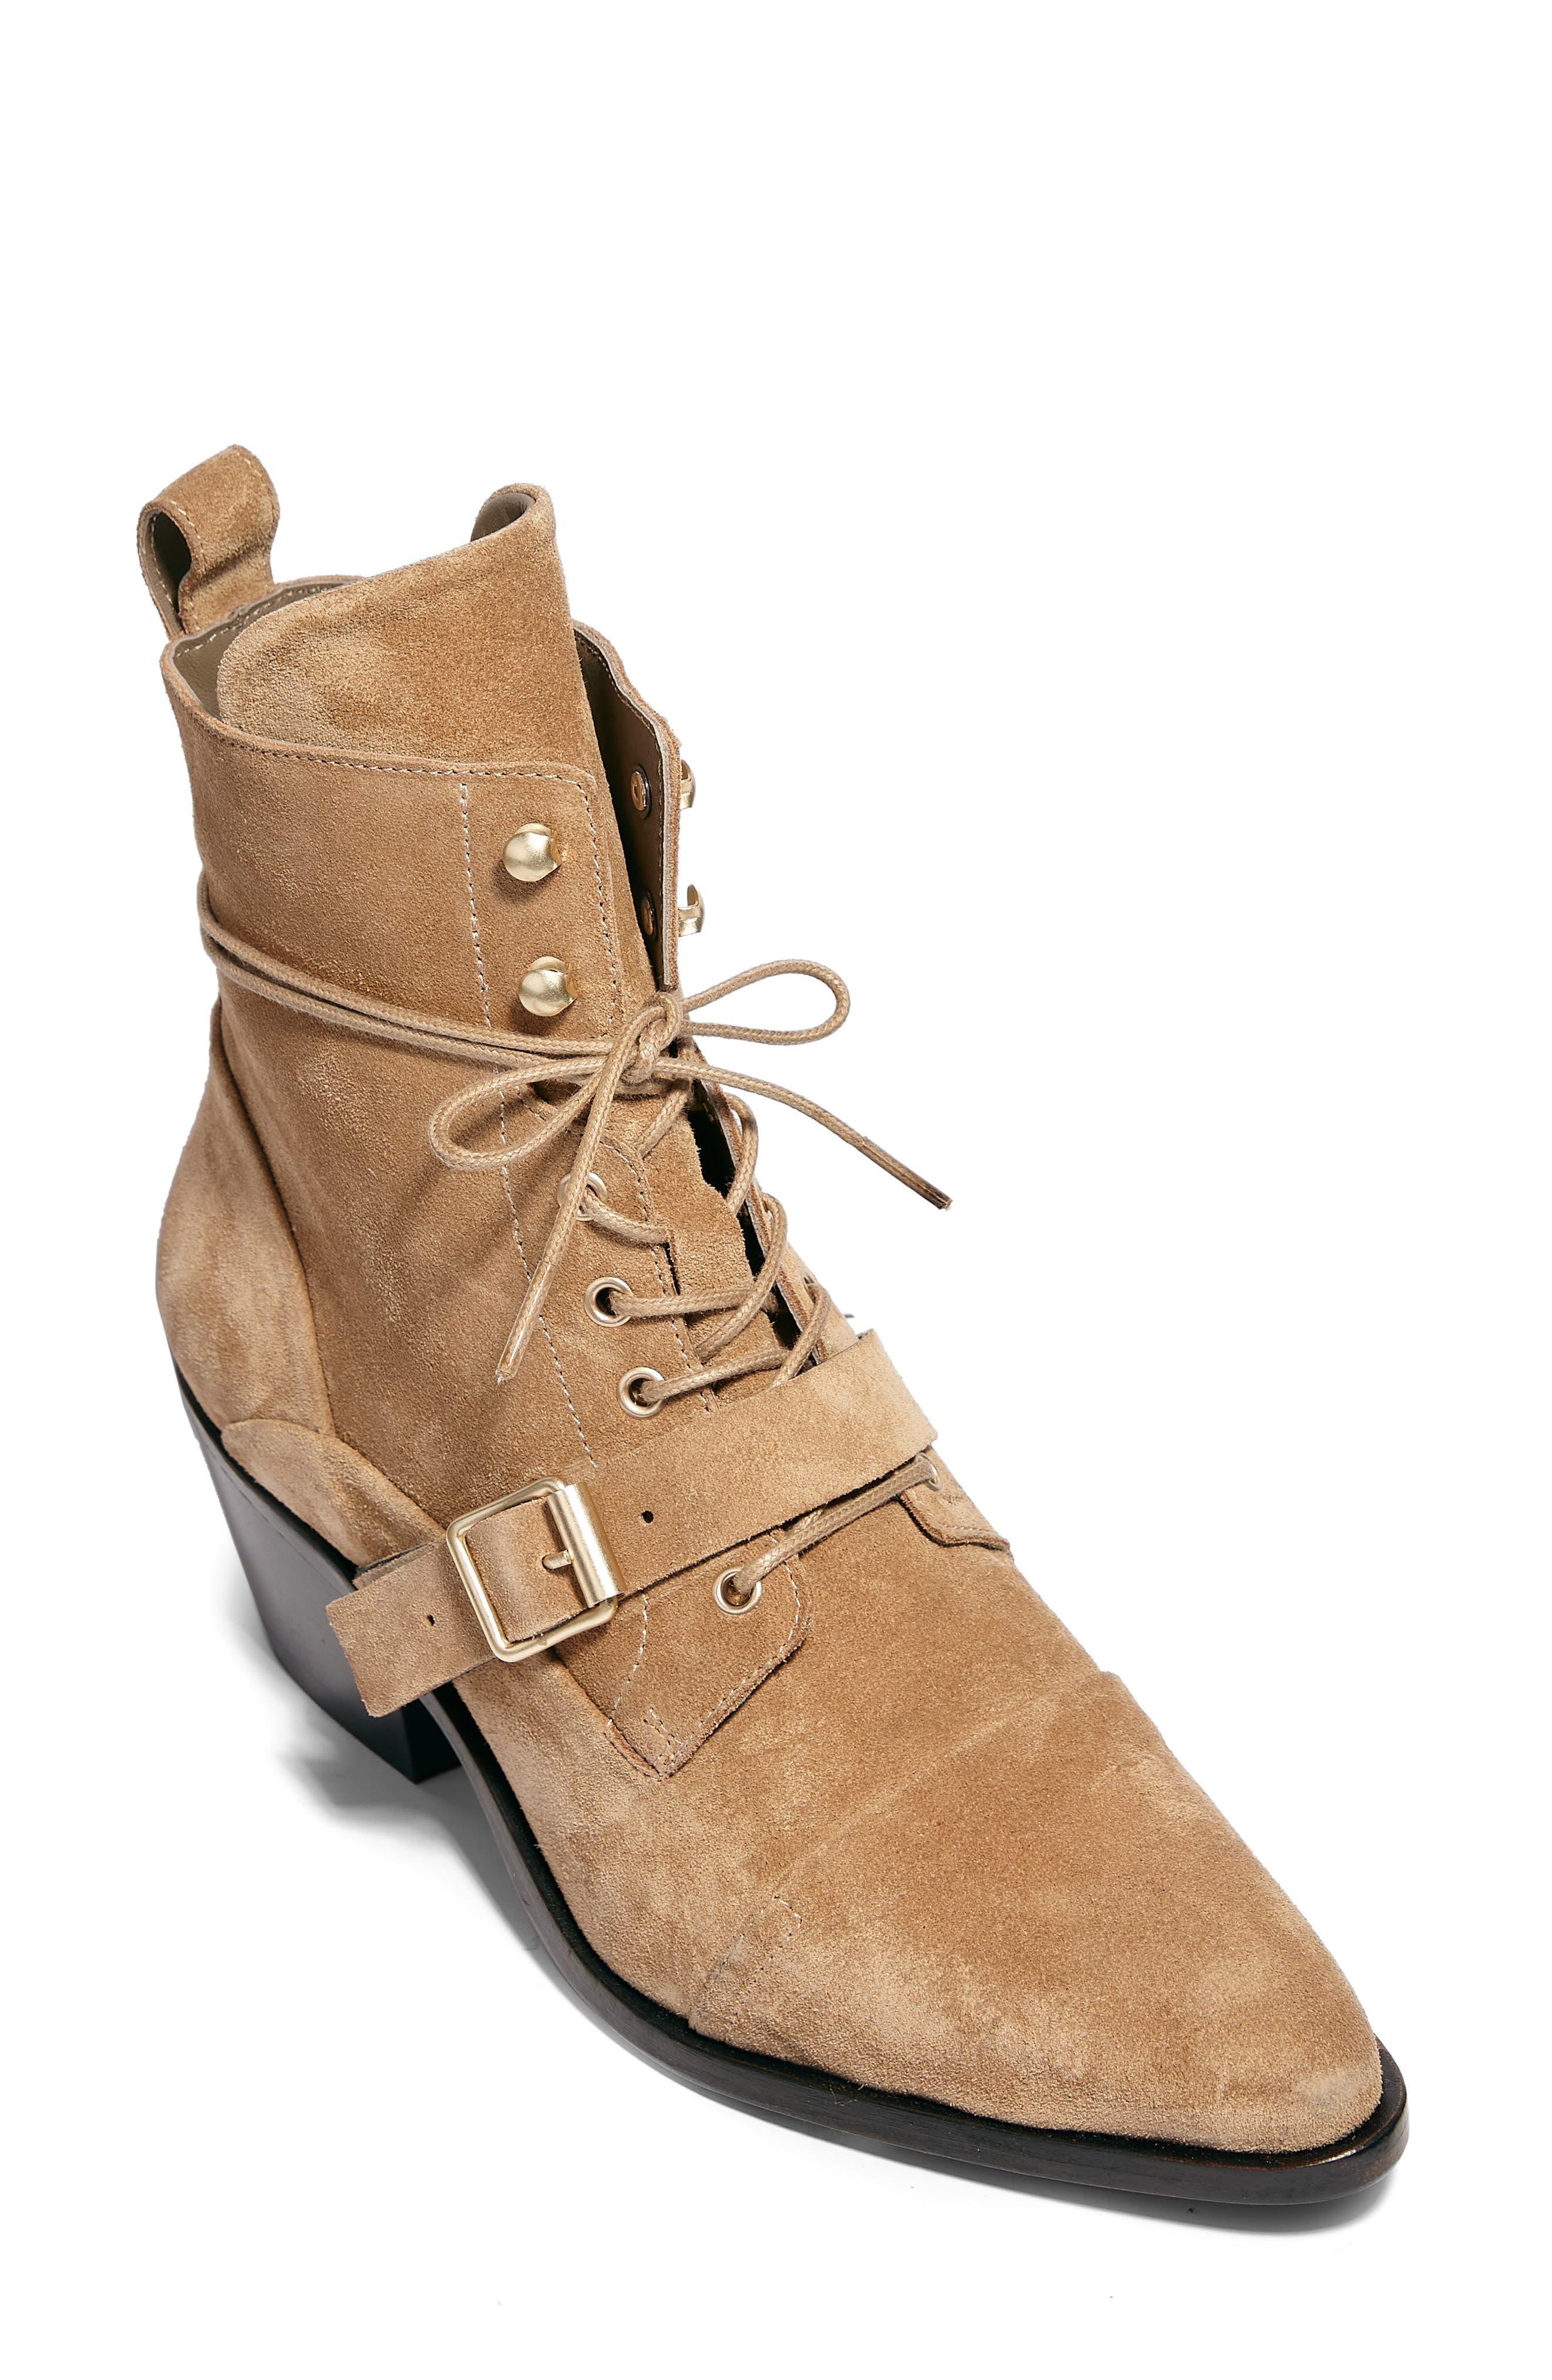 AllSaints Katy Boot in Desert Sand Suede (Natural) - Lyst